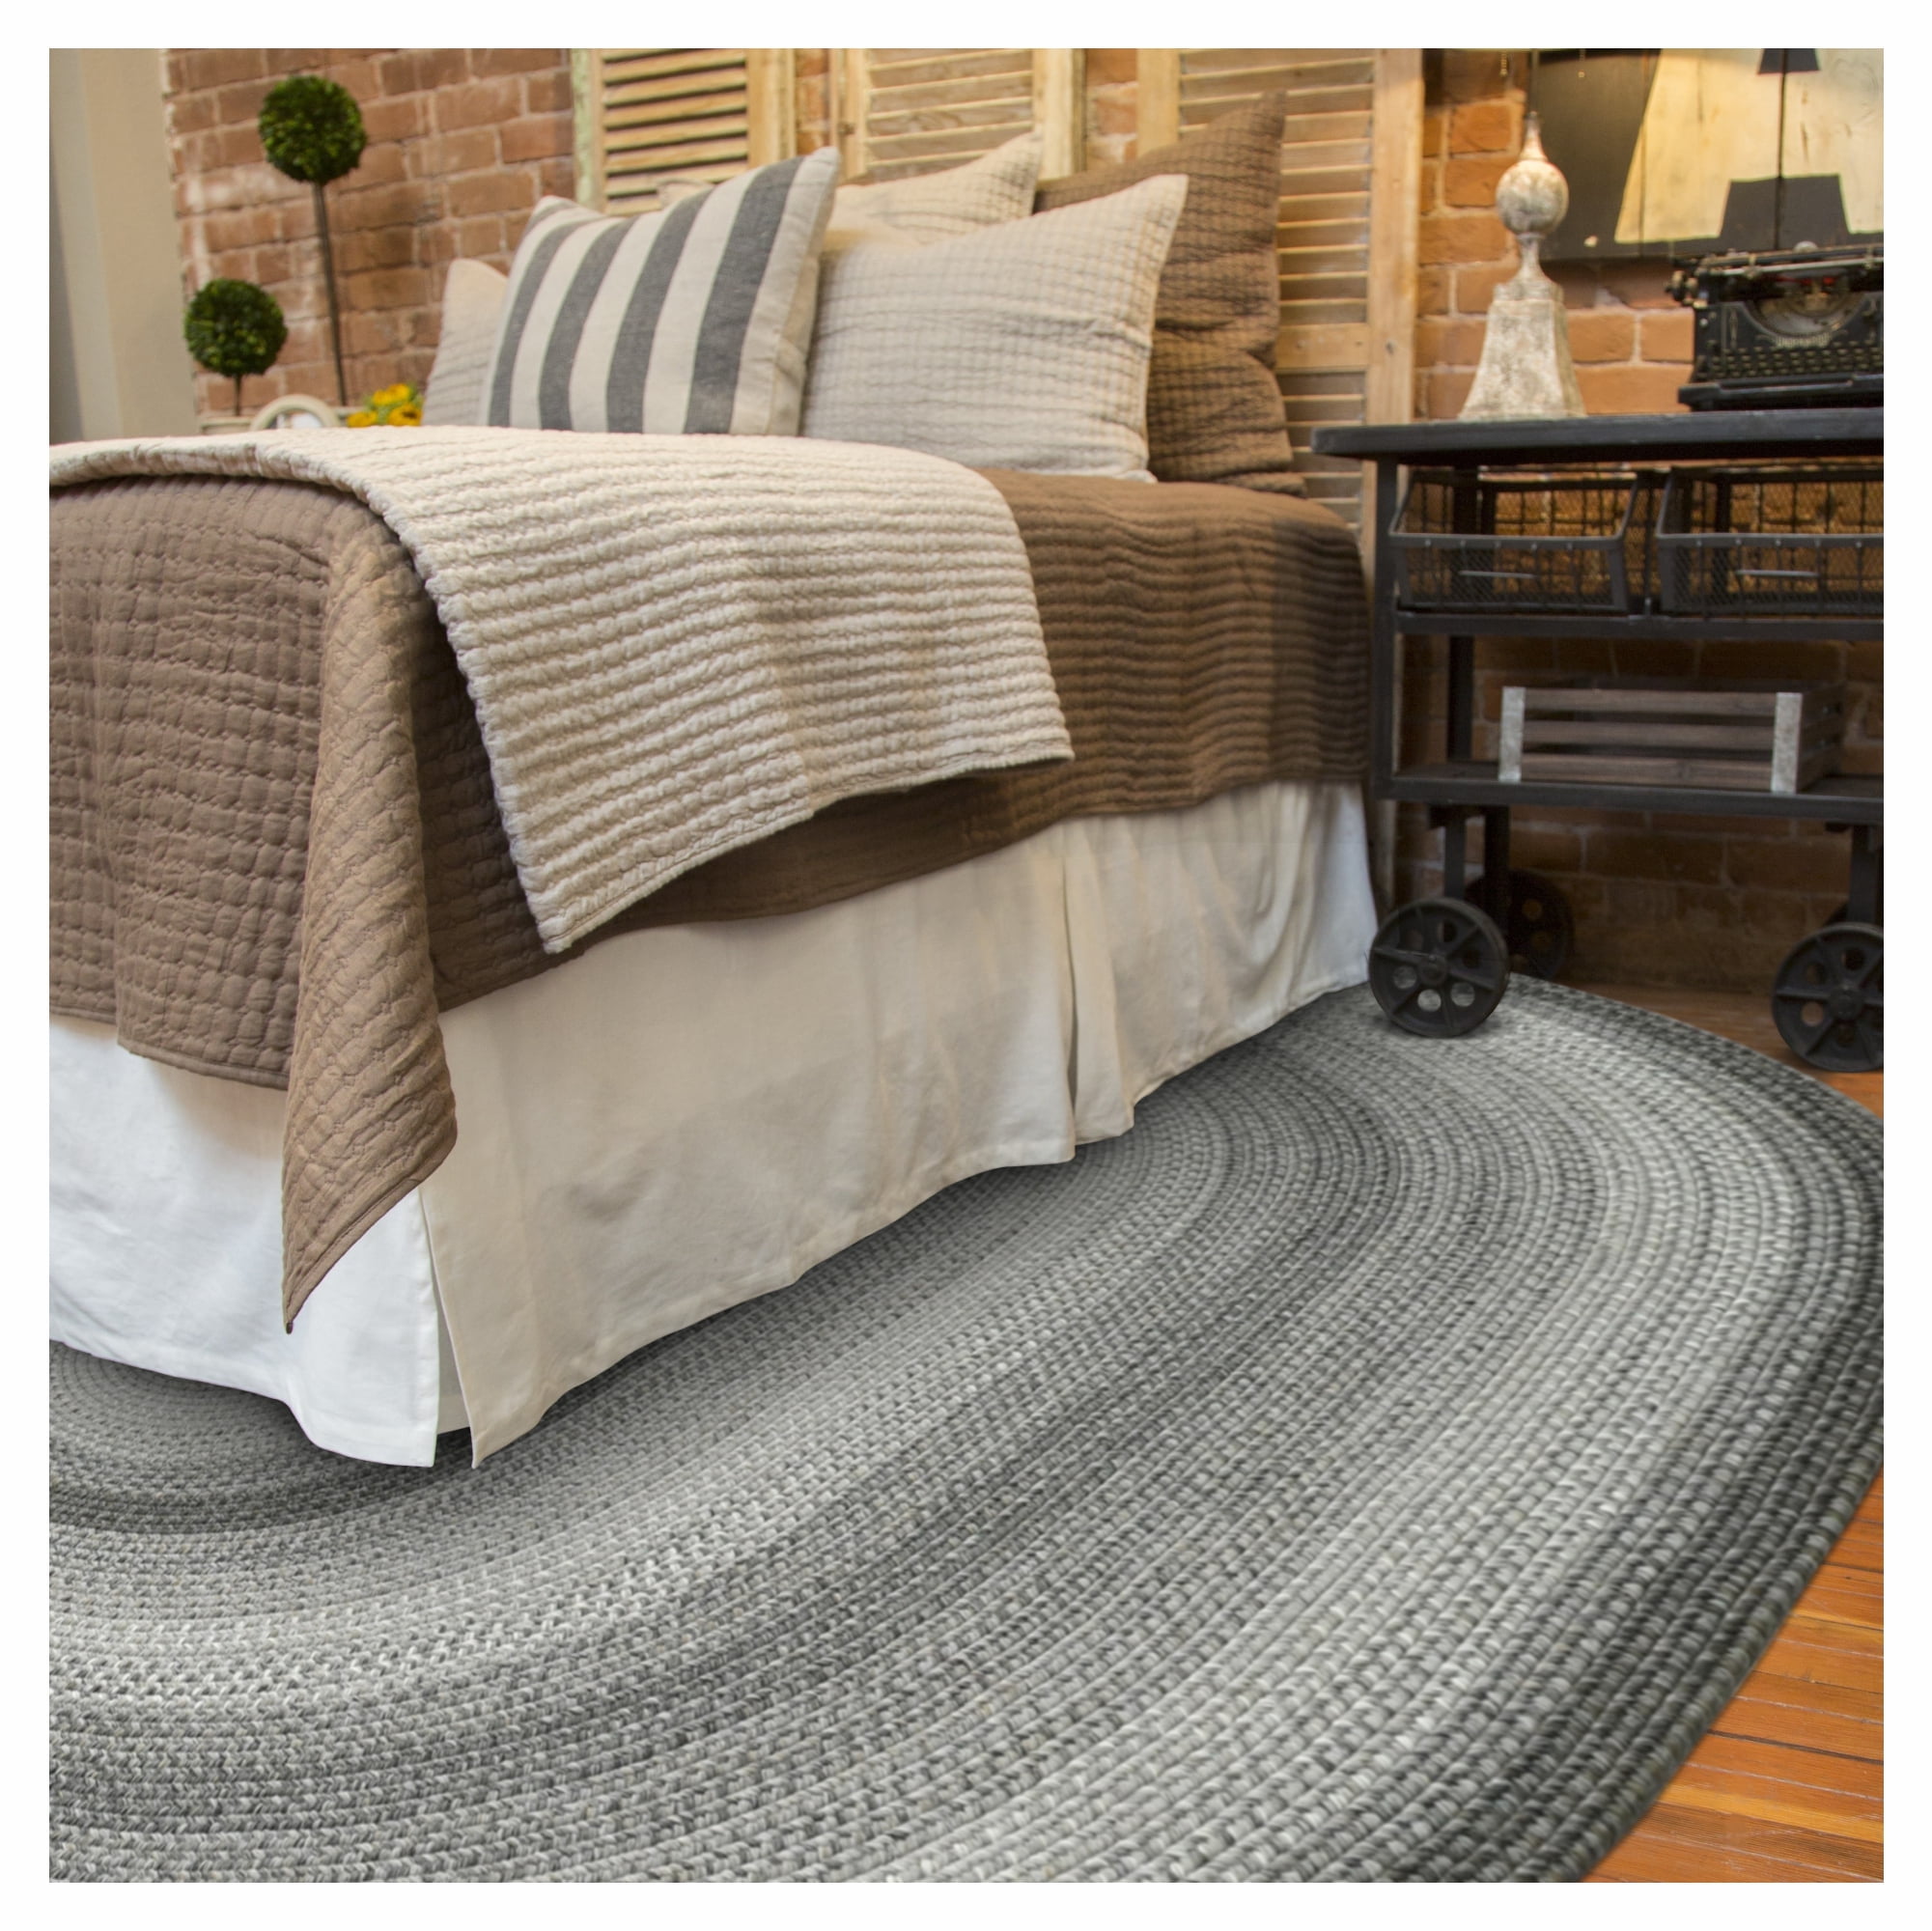 Homespice Graphite 8x10' Gray Oval Braided Rug, Washable Rug for